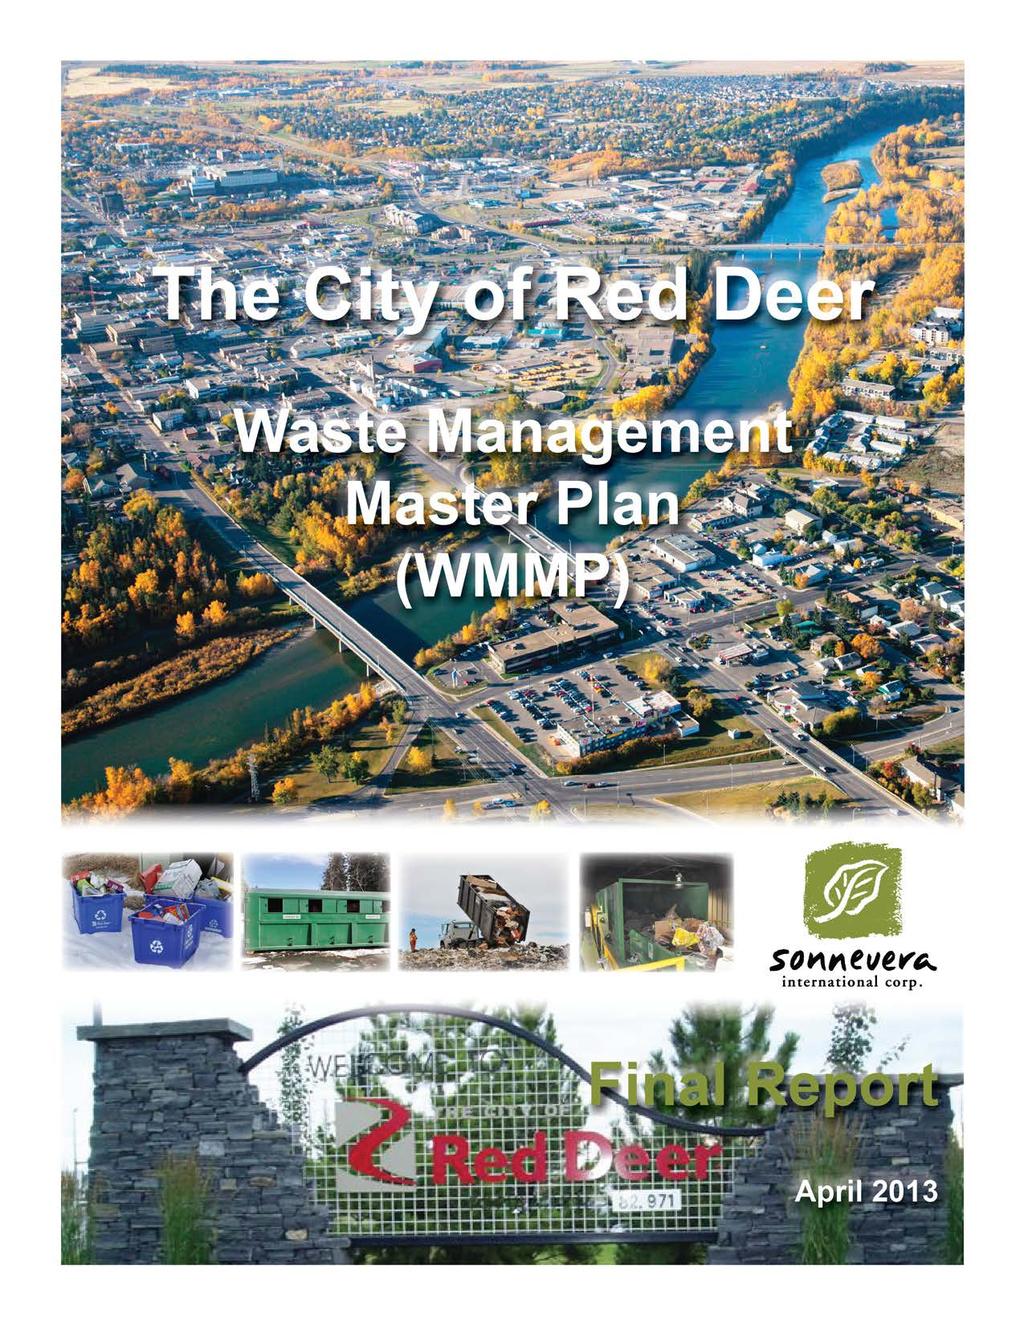 Waste Management Master Plan (WMMP) Final Report The City of Red Deer